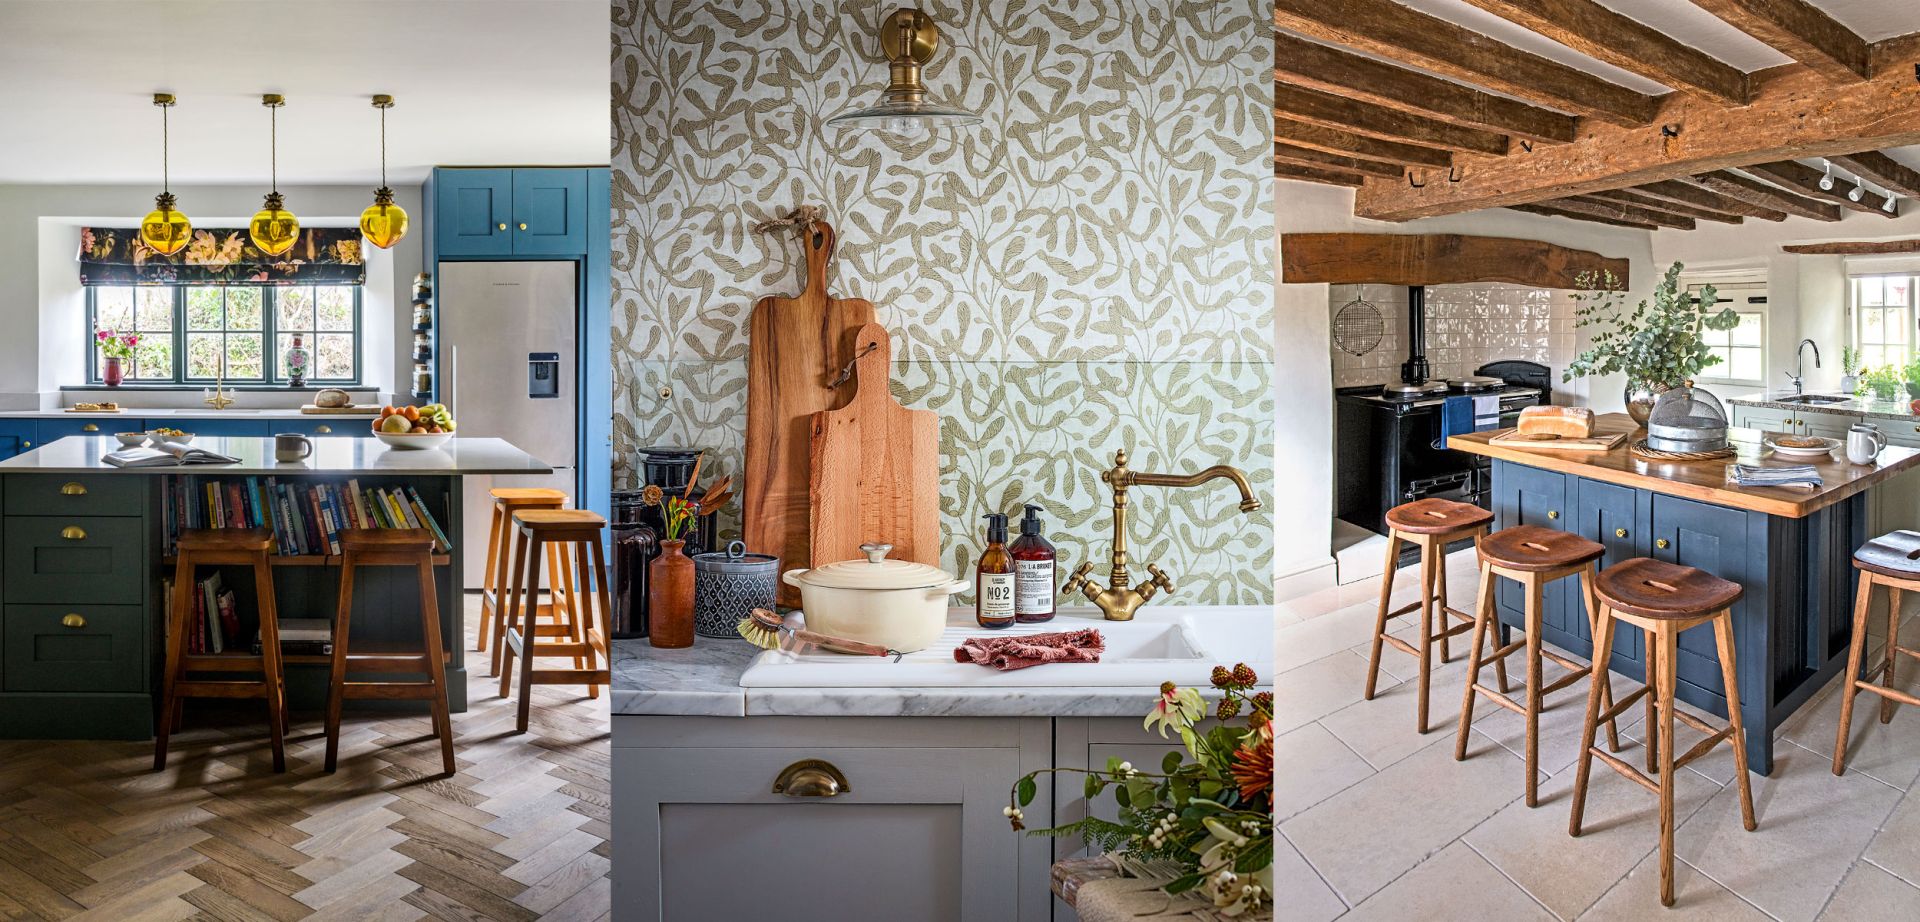 Country kitchen ideas – get the rustic look with our ultimate ...